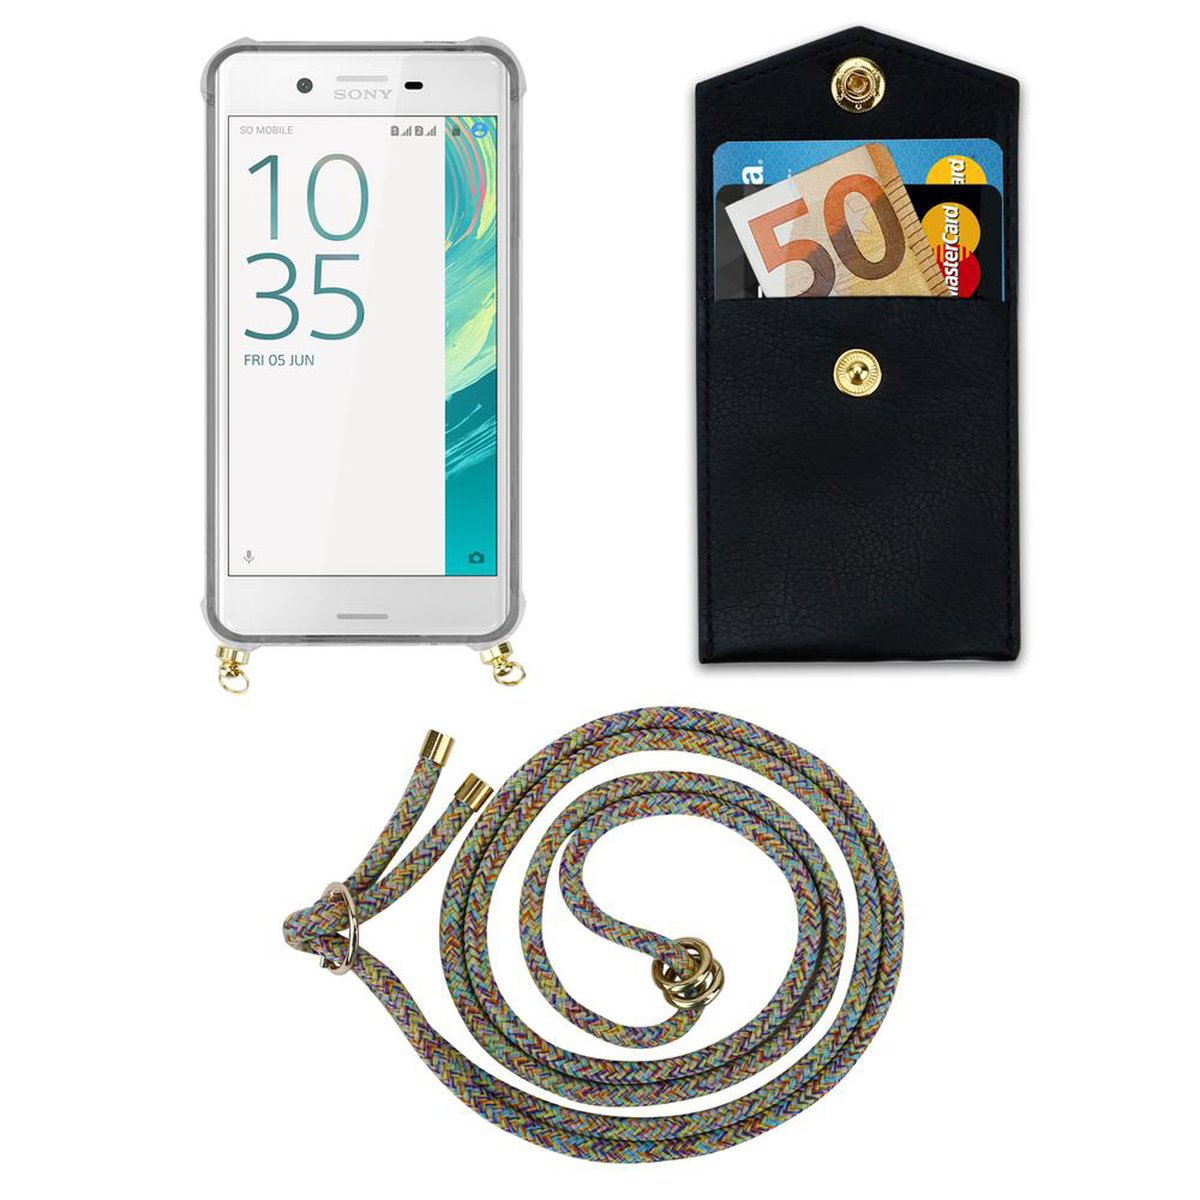 CADORABO Handy Kette mit Gold RAINBOW Hülle, Sony, abnehmbarer Kordel Band und Xperia Ringen, X, Backcover